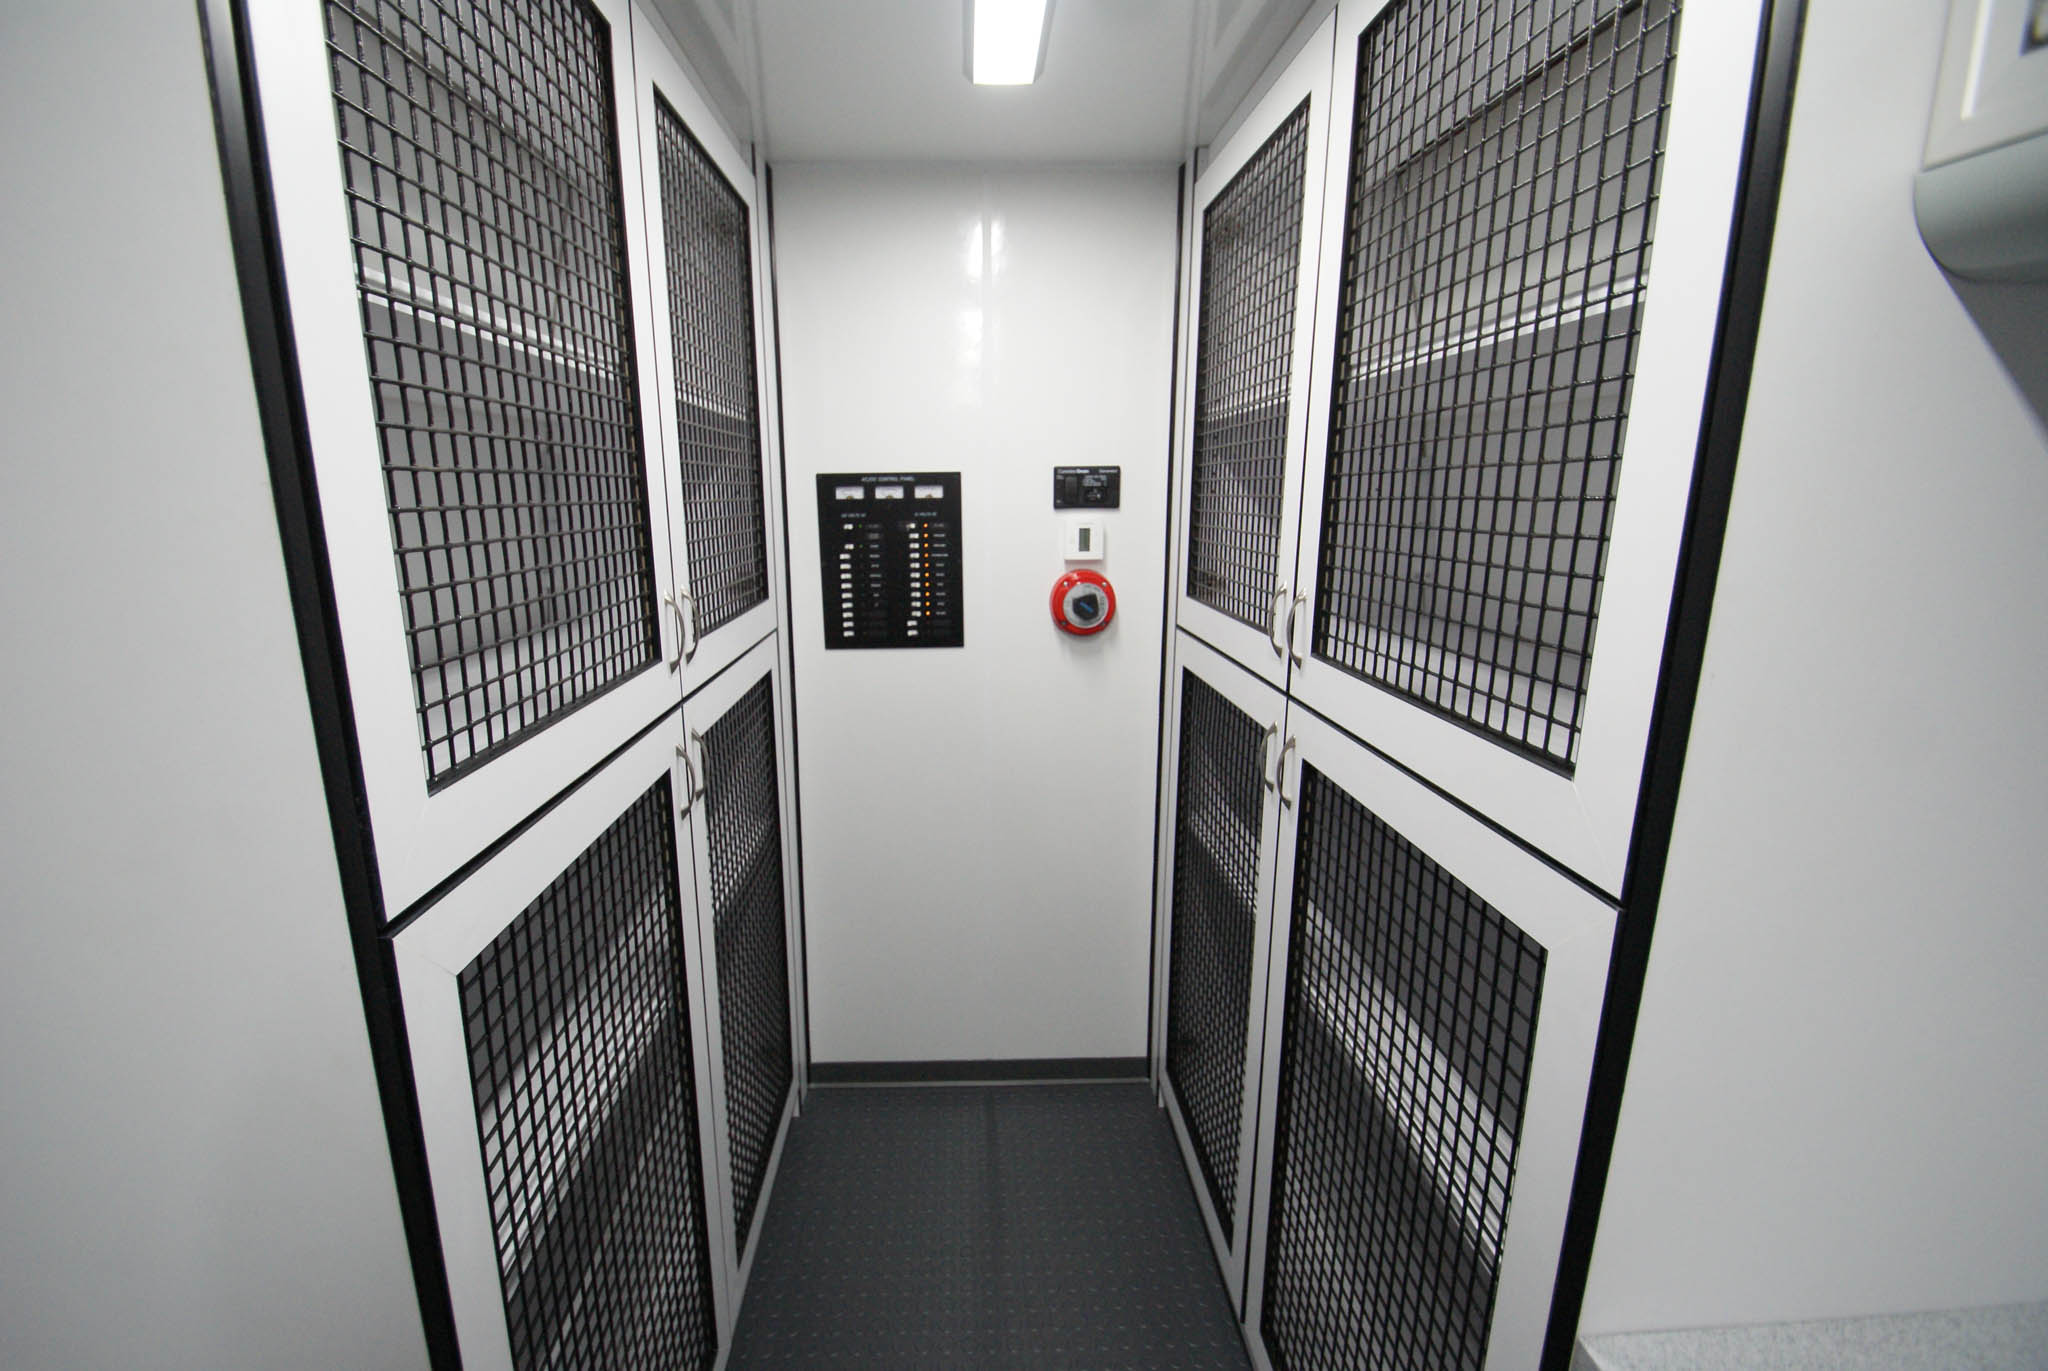 An interior view of the storage cabinets inside the unit for Escondido, CA.